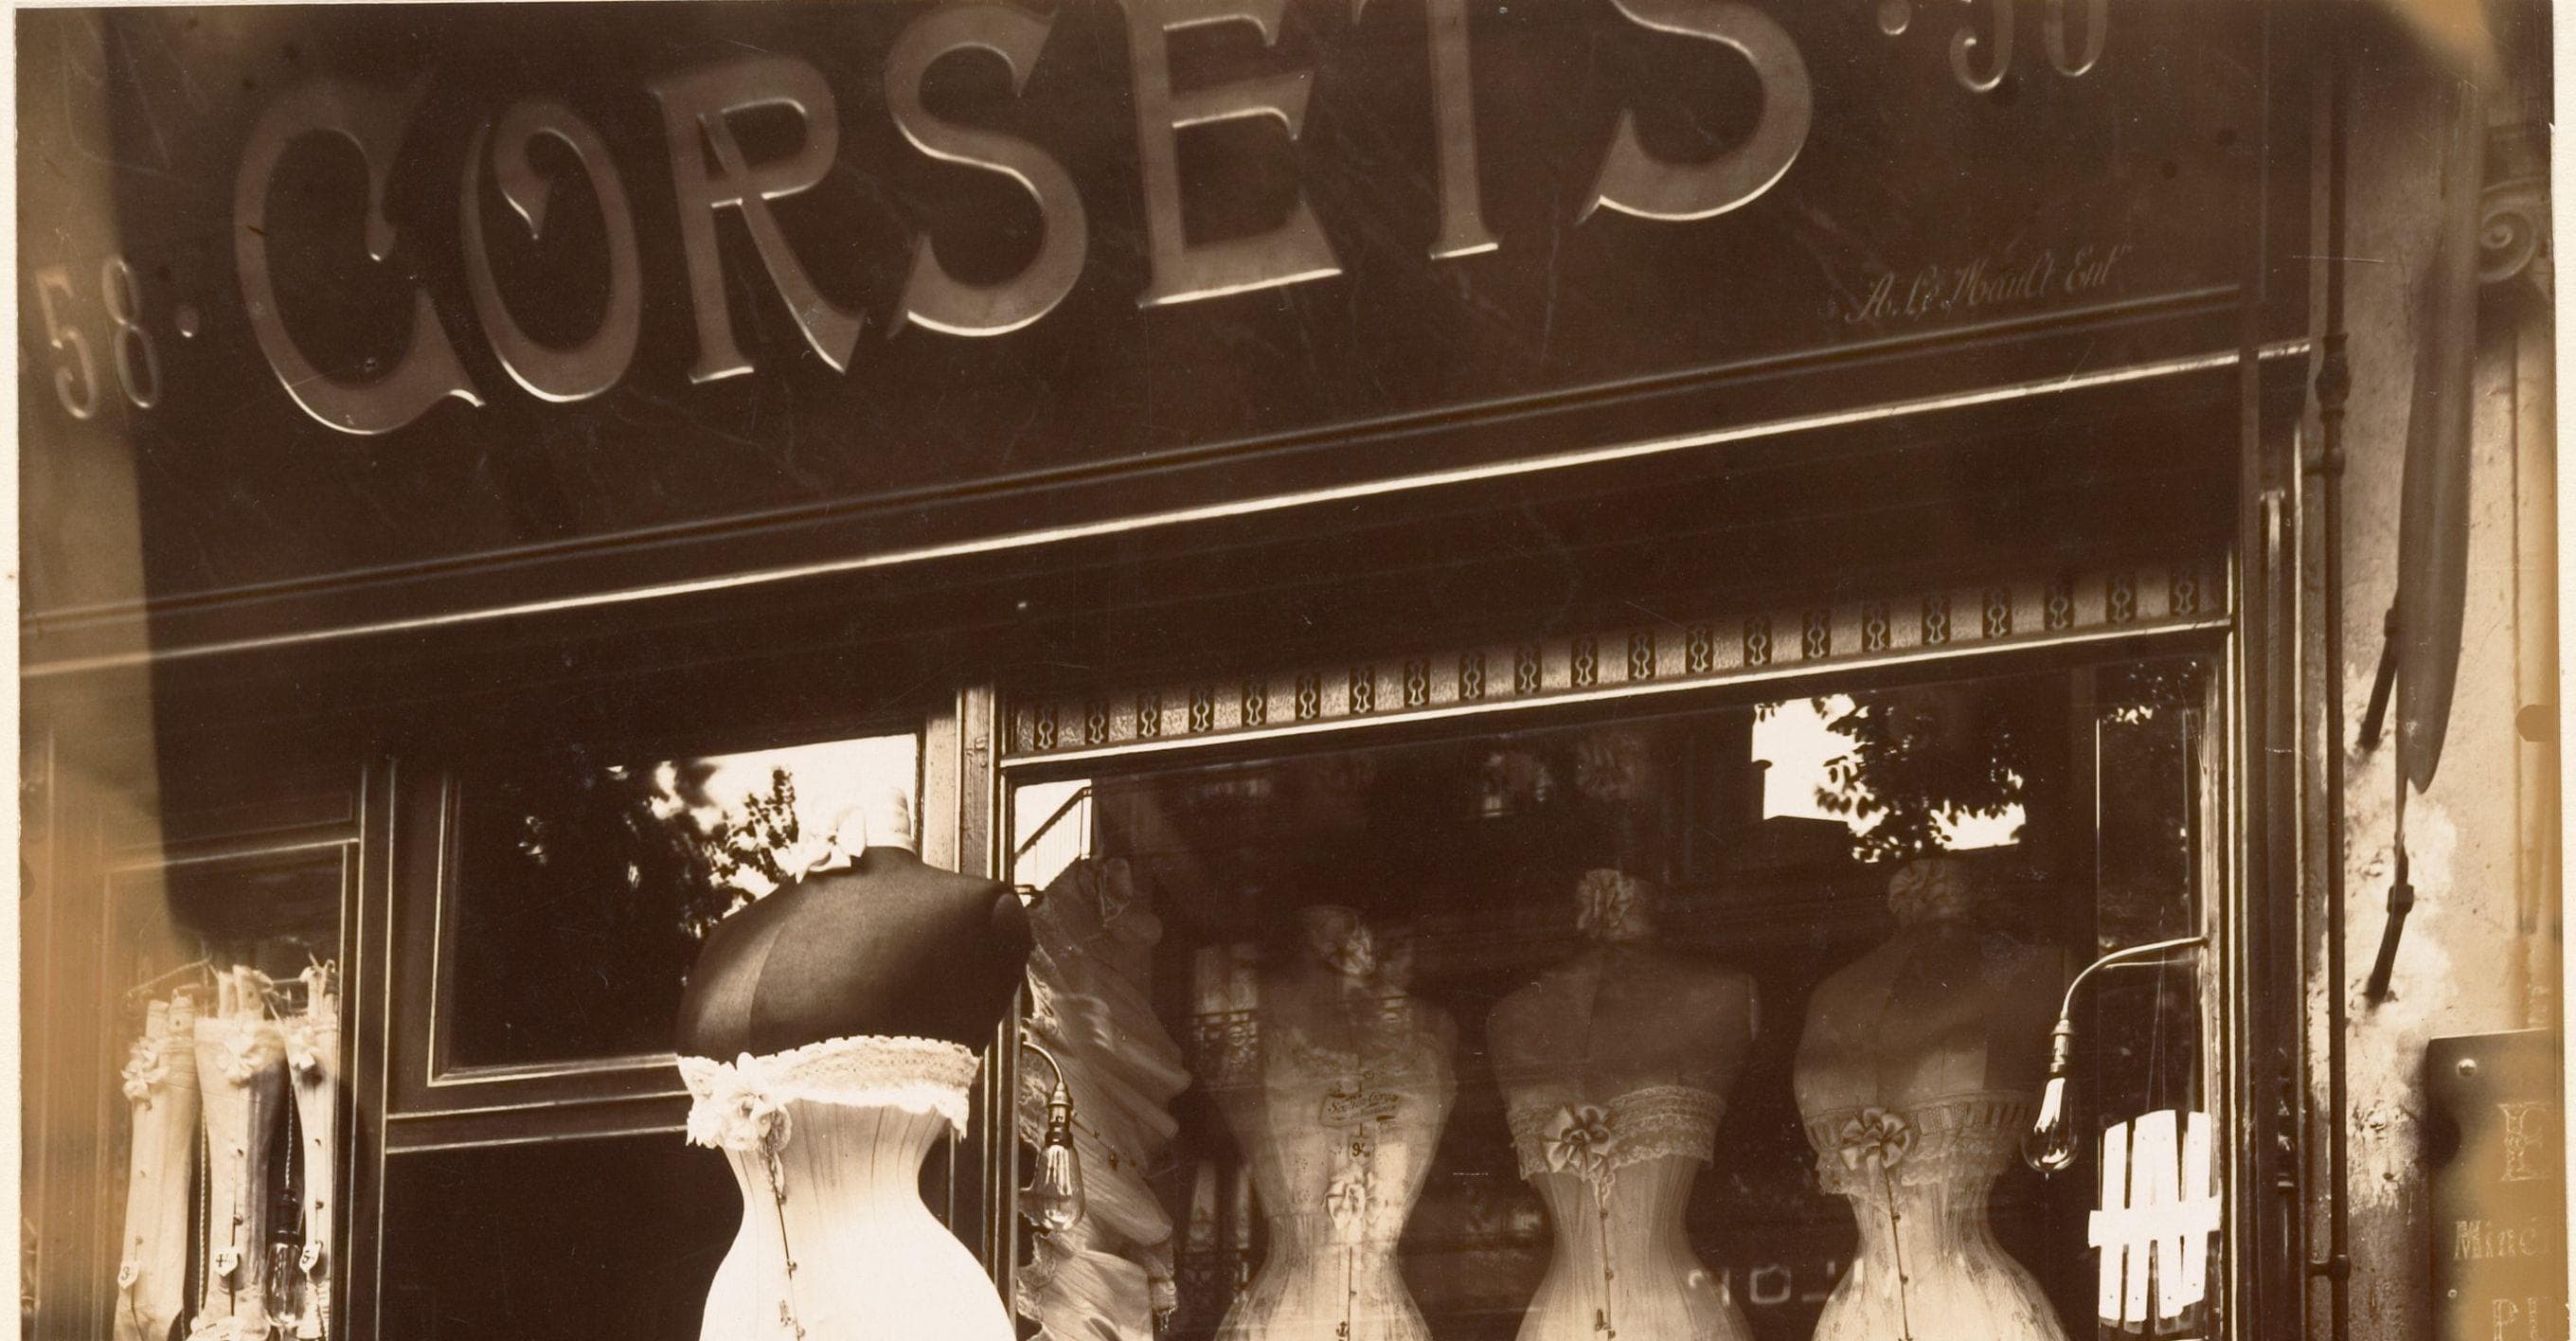 11 Facts You Didn't Know About The History of Corsets